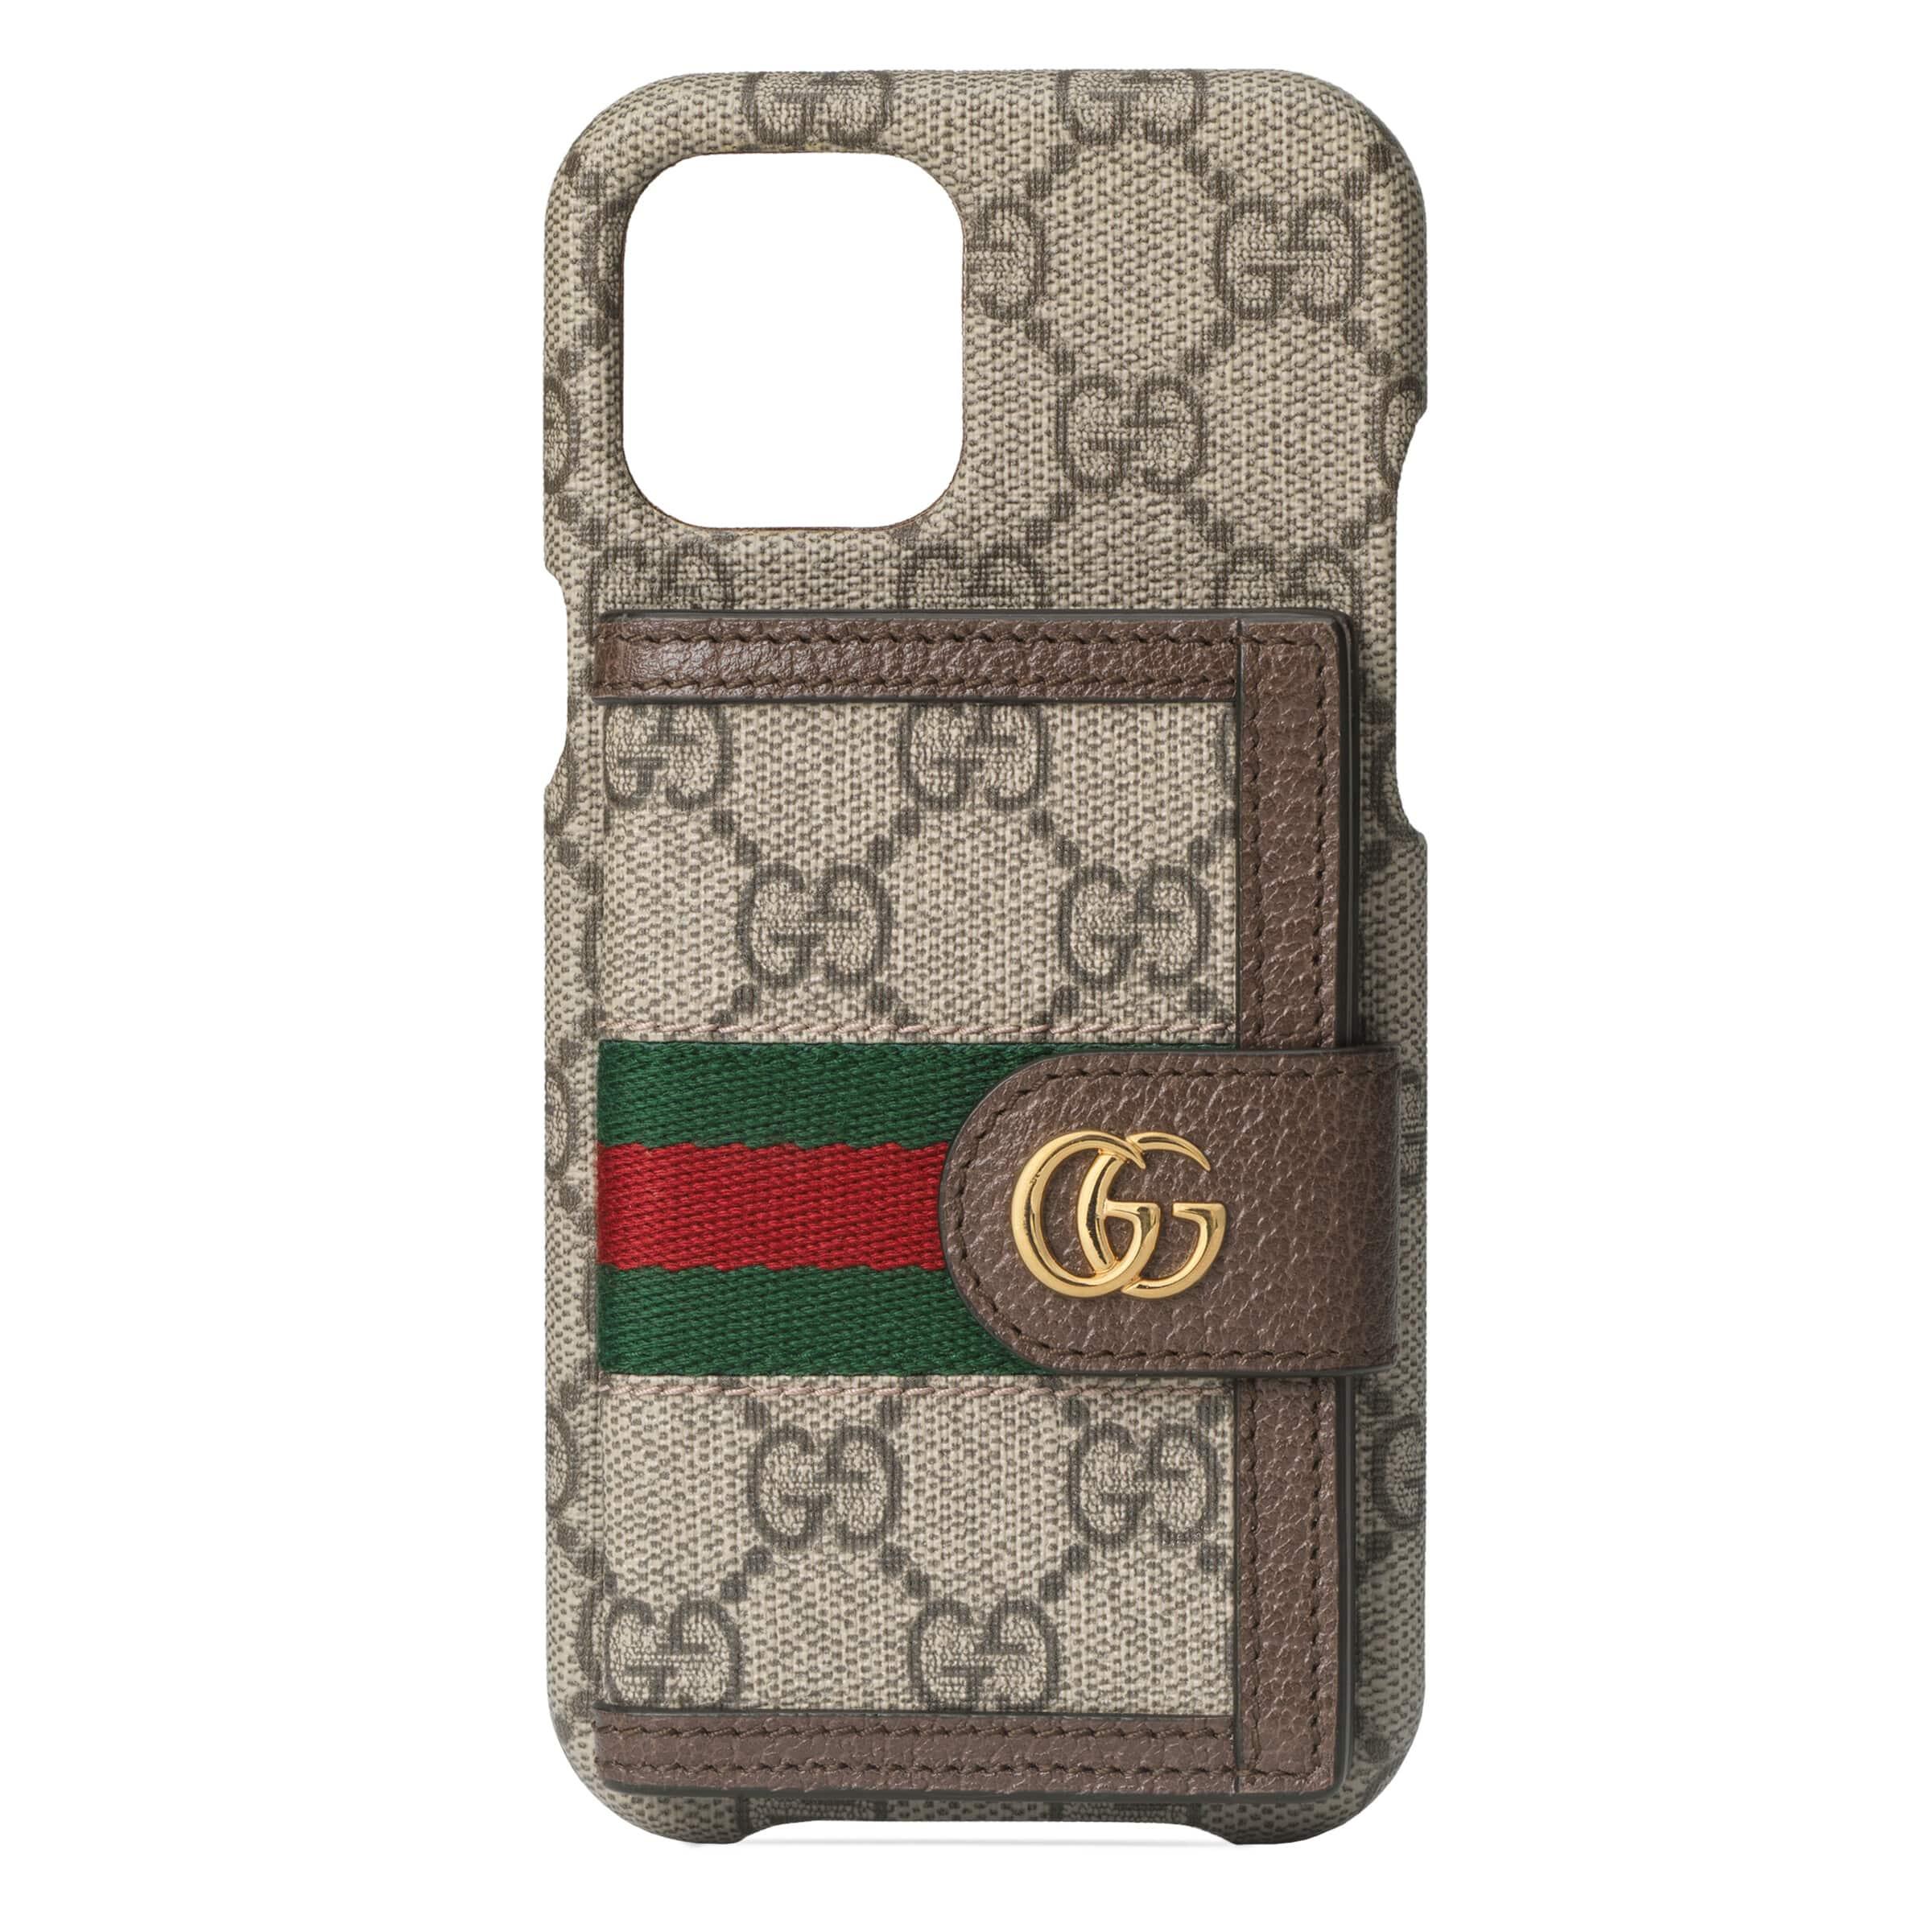 Gucci Online Exclusive Ophidia Case For Iphone 12 Pro Max in Natural